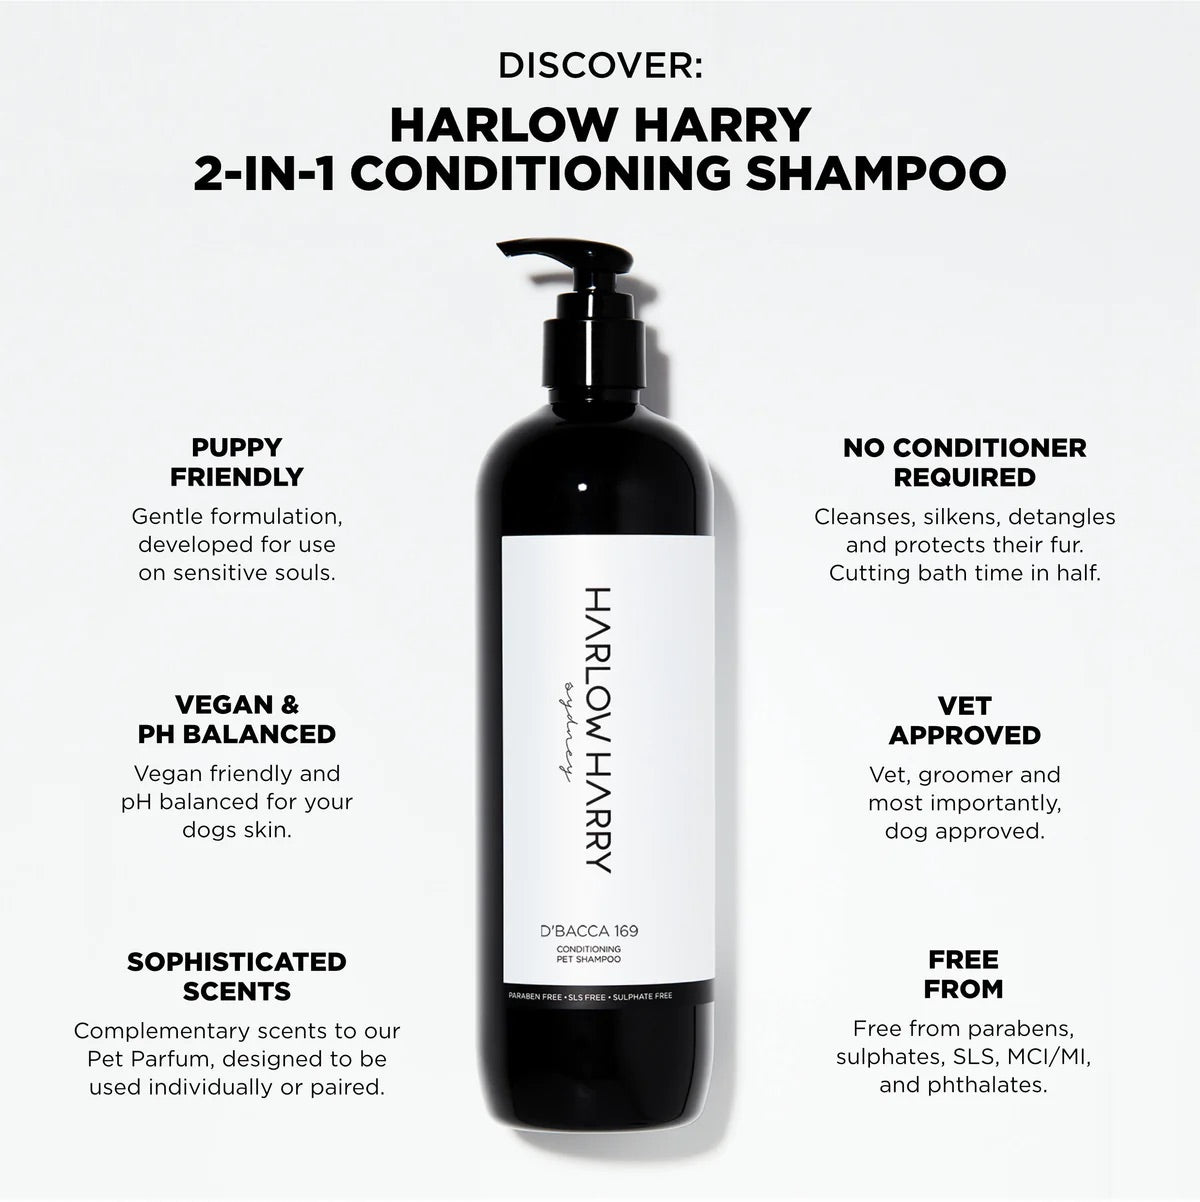 Harlow Harry Conditioning Pet Shampoo| D'bacca 169